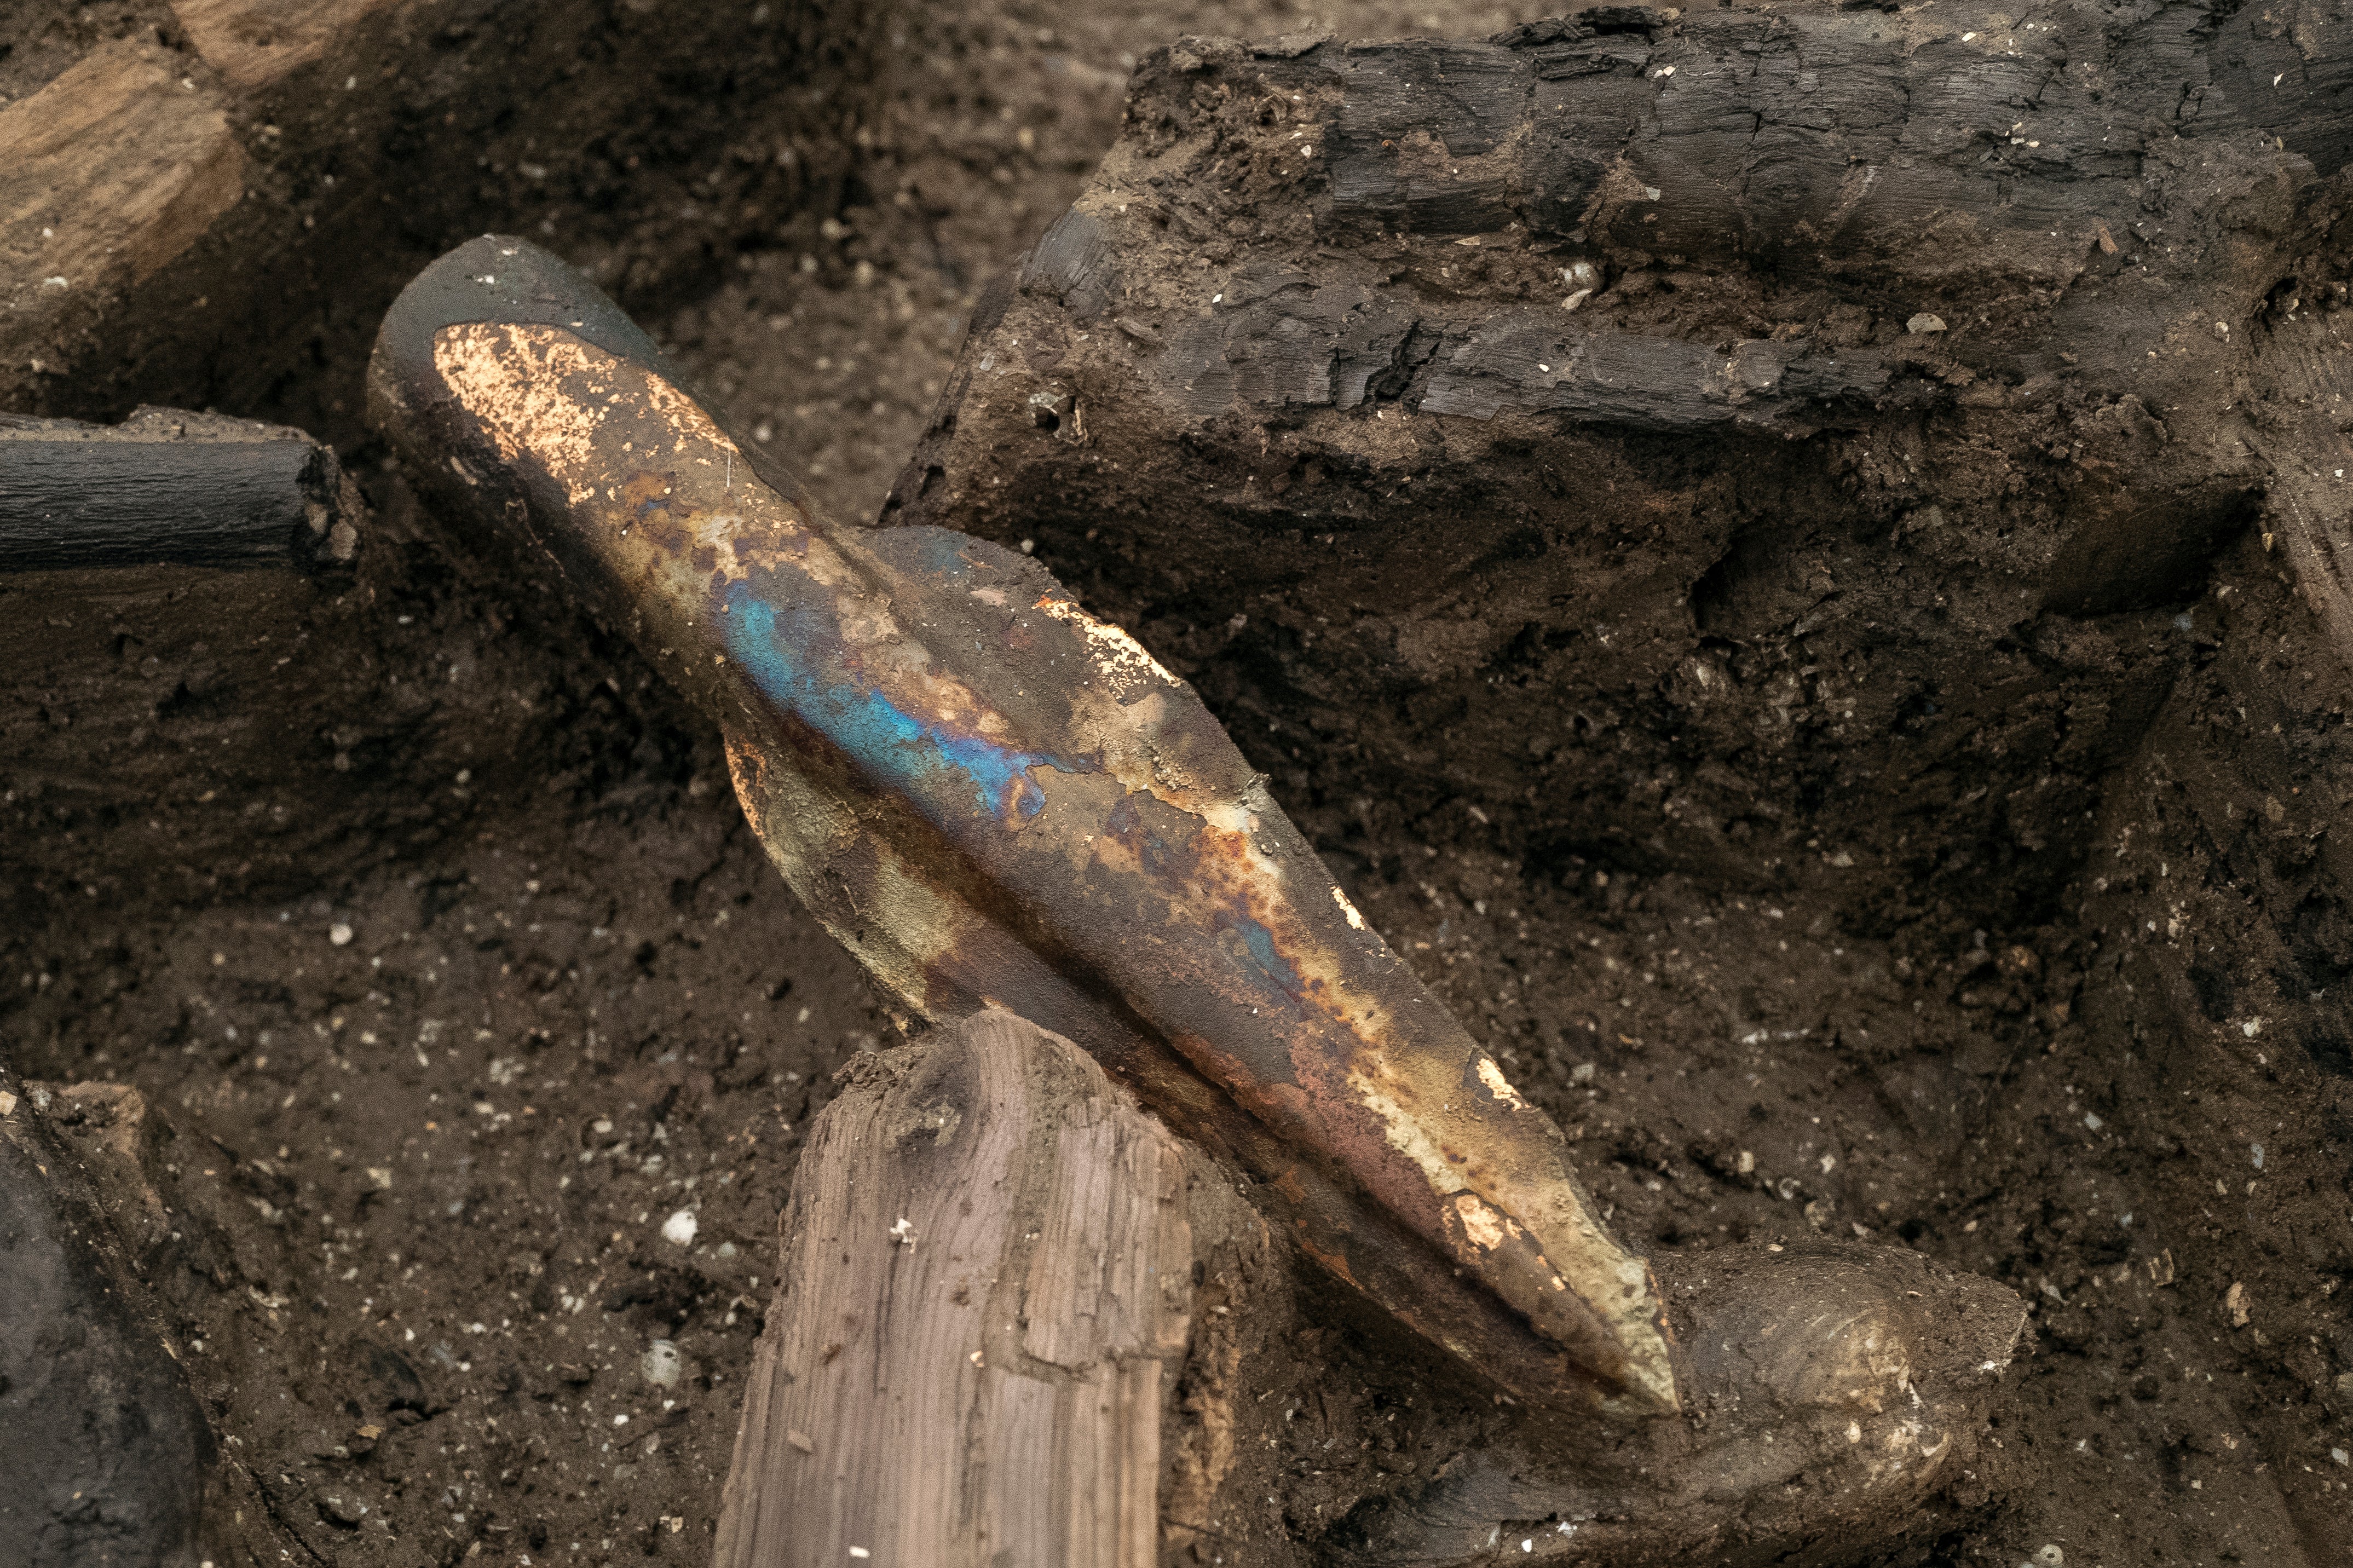 A spearhead discovered at the Must Farm quarry excavation site in Cambridgeshire